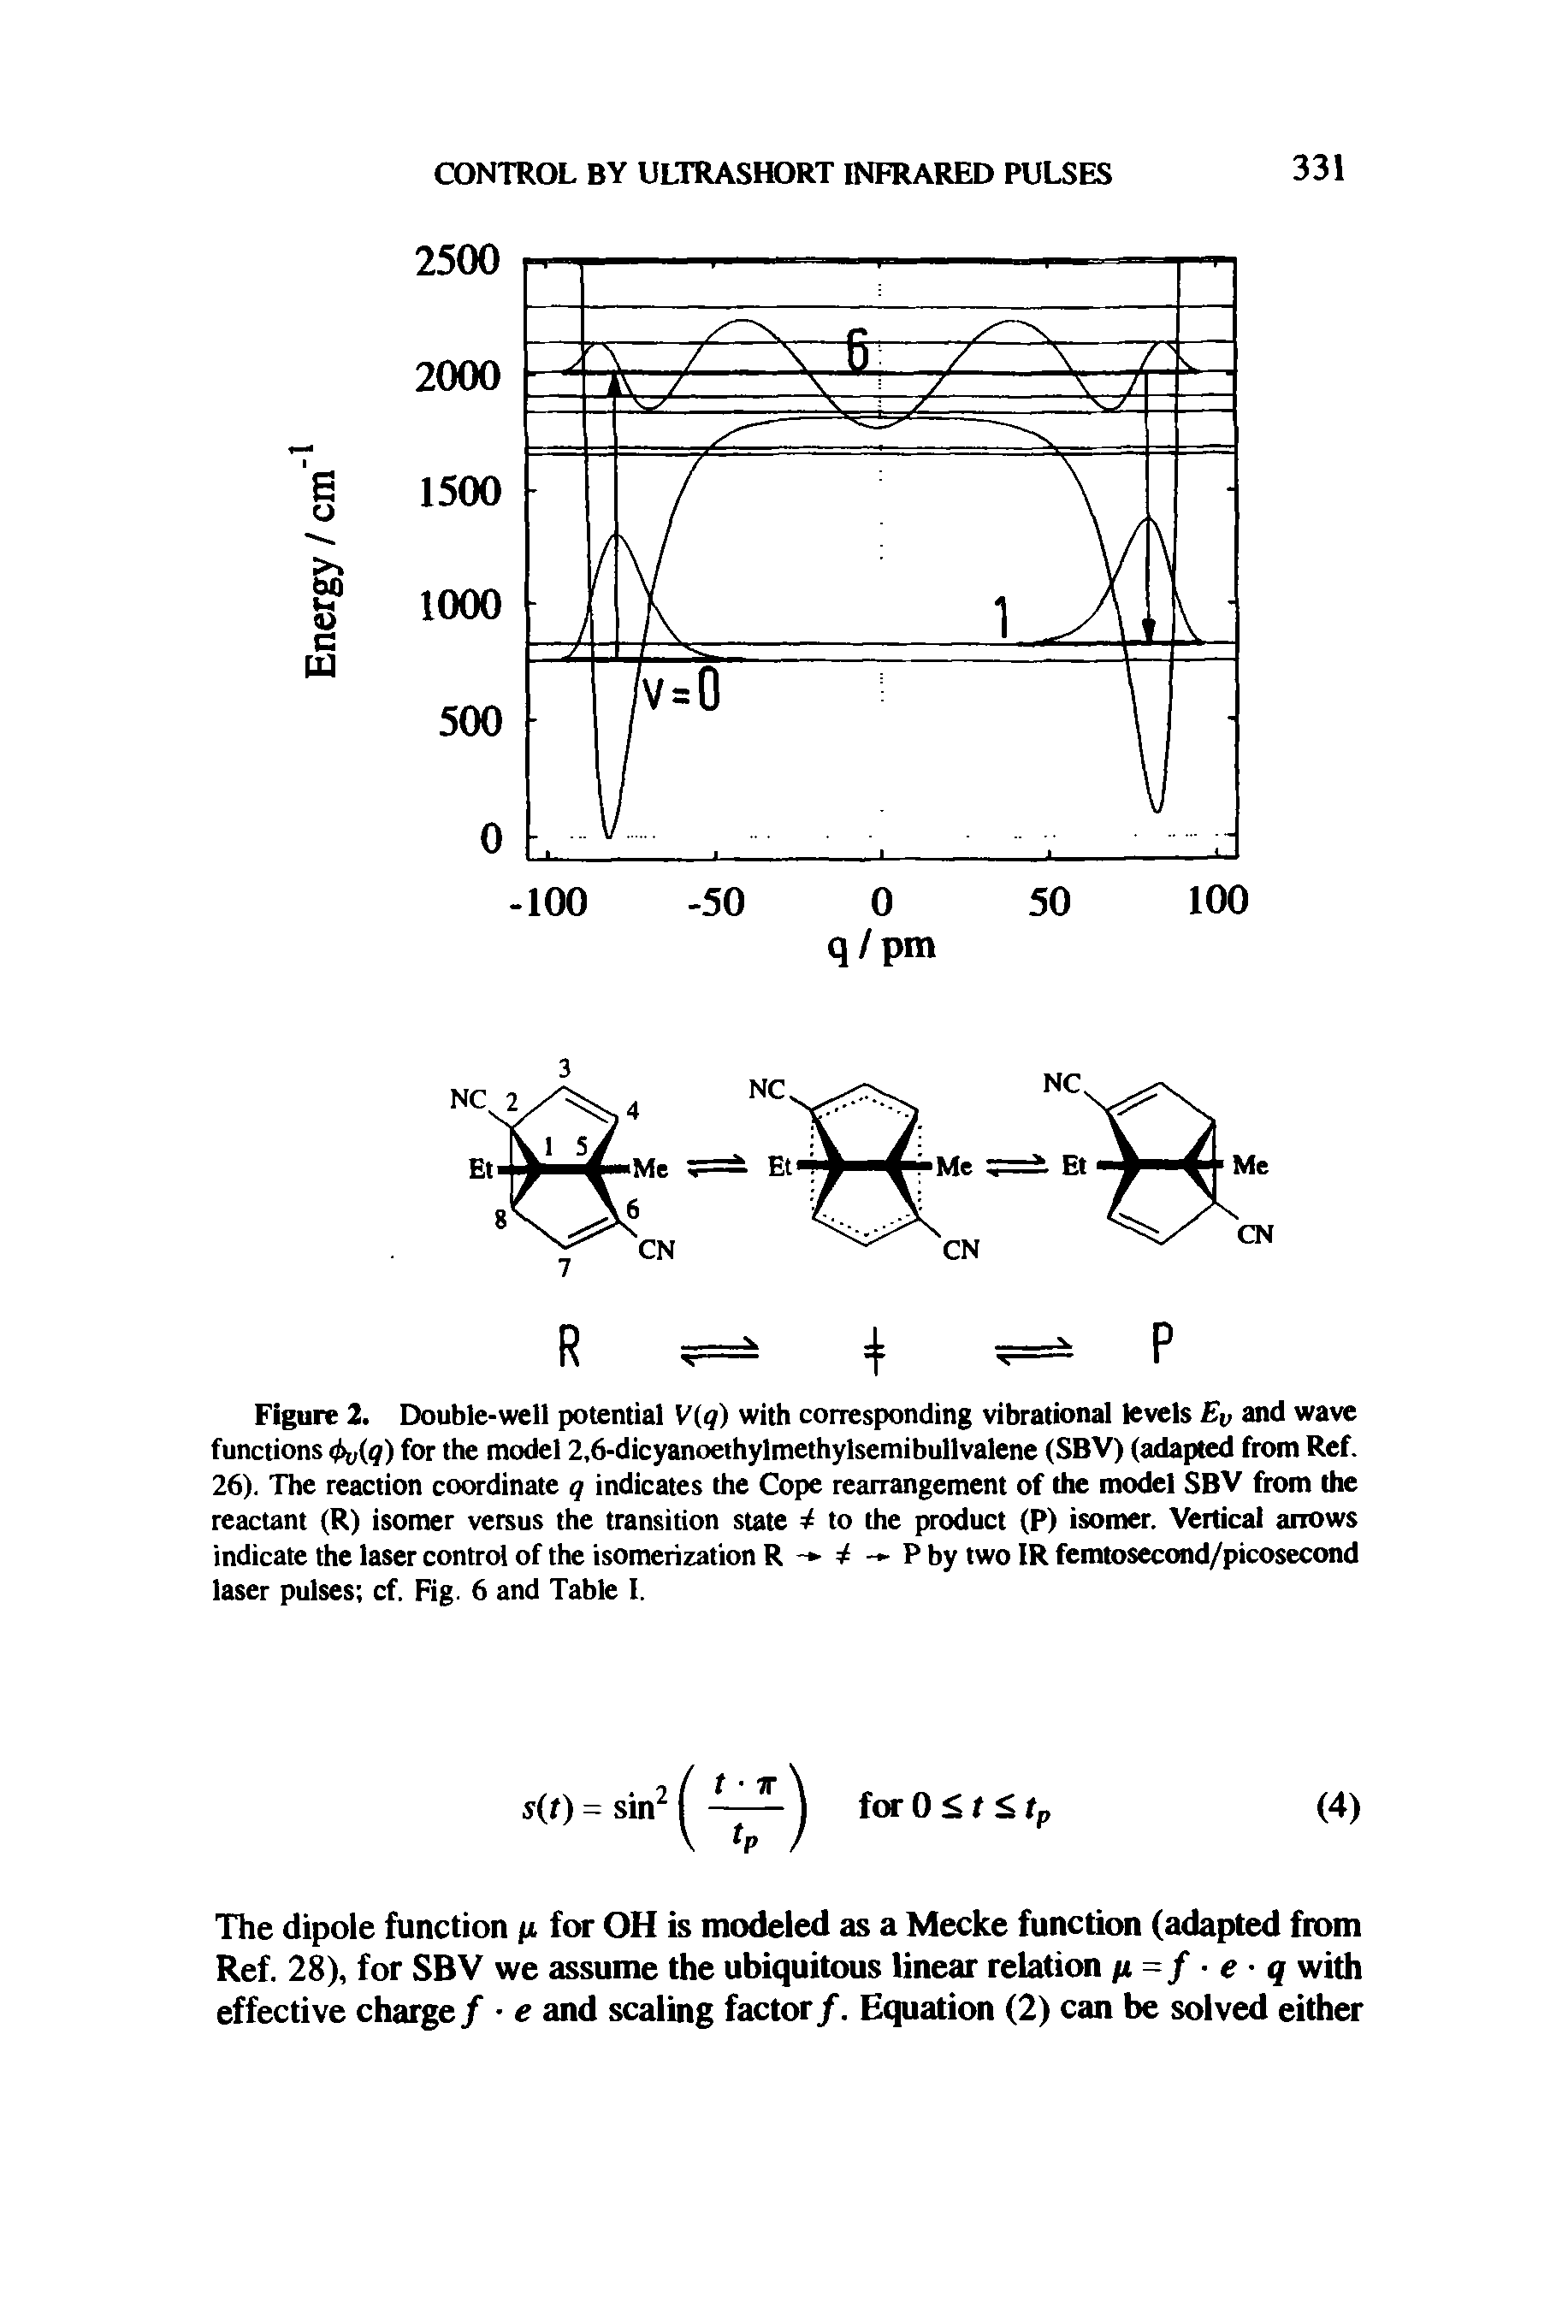 Figure 2. Double-well potential V(q) with corresponding vibrational levels Ev and wave functions <t>v(q) for the model 2,6-dicyanoethylmethylsemibullvalene (SBV) (adapted from Ref. 26). The reaction coordinate q indicates the Cope rearrangement of the model SBV from the reactant (R) isomer versus the transition state 1 to the product (P) isomer. Vertical arrows indicate the laser control of the isomerization R - — P by two IR femtosecond/picosecond laser pulses cf. Fig. 6 and Table I.